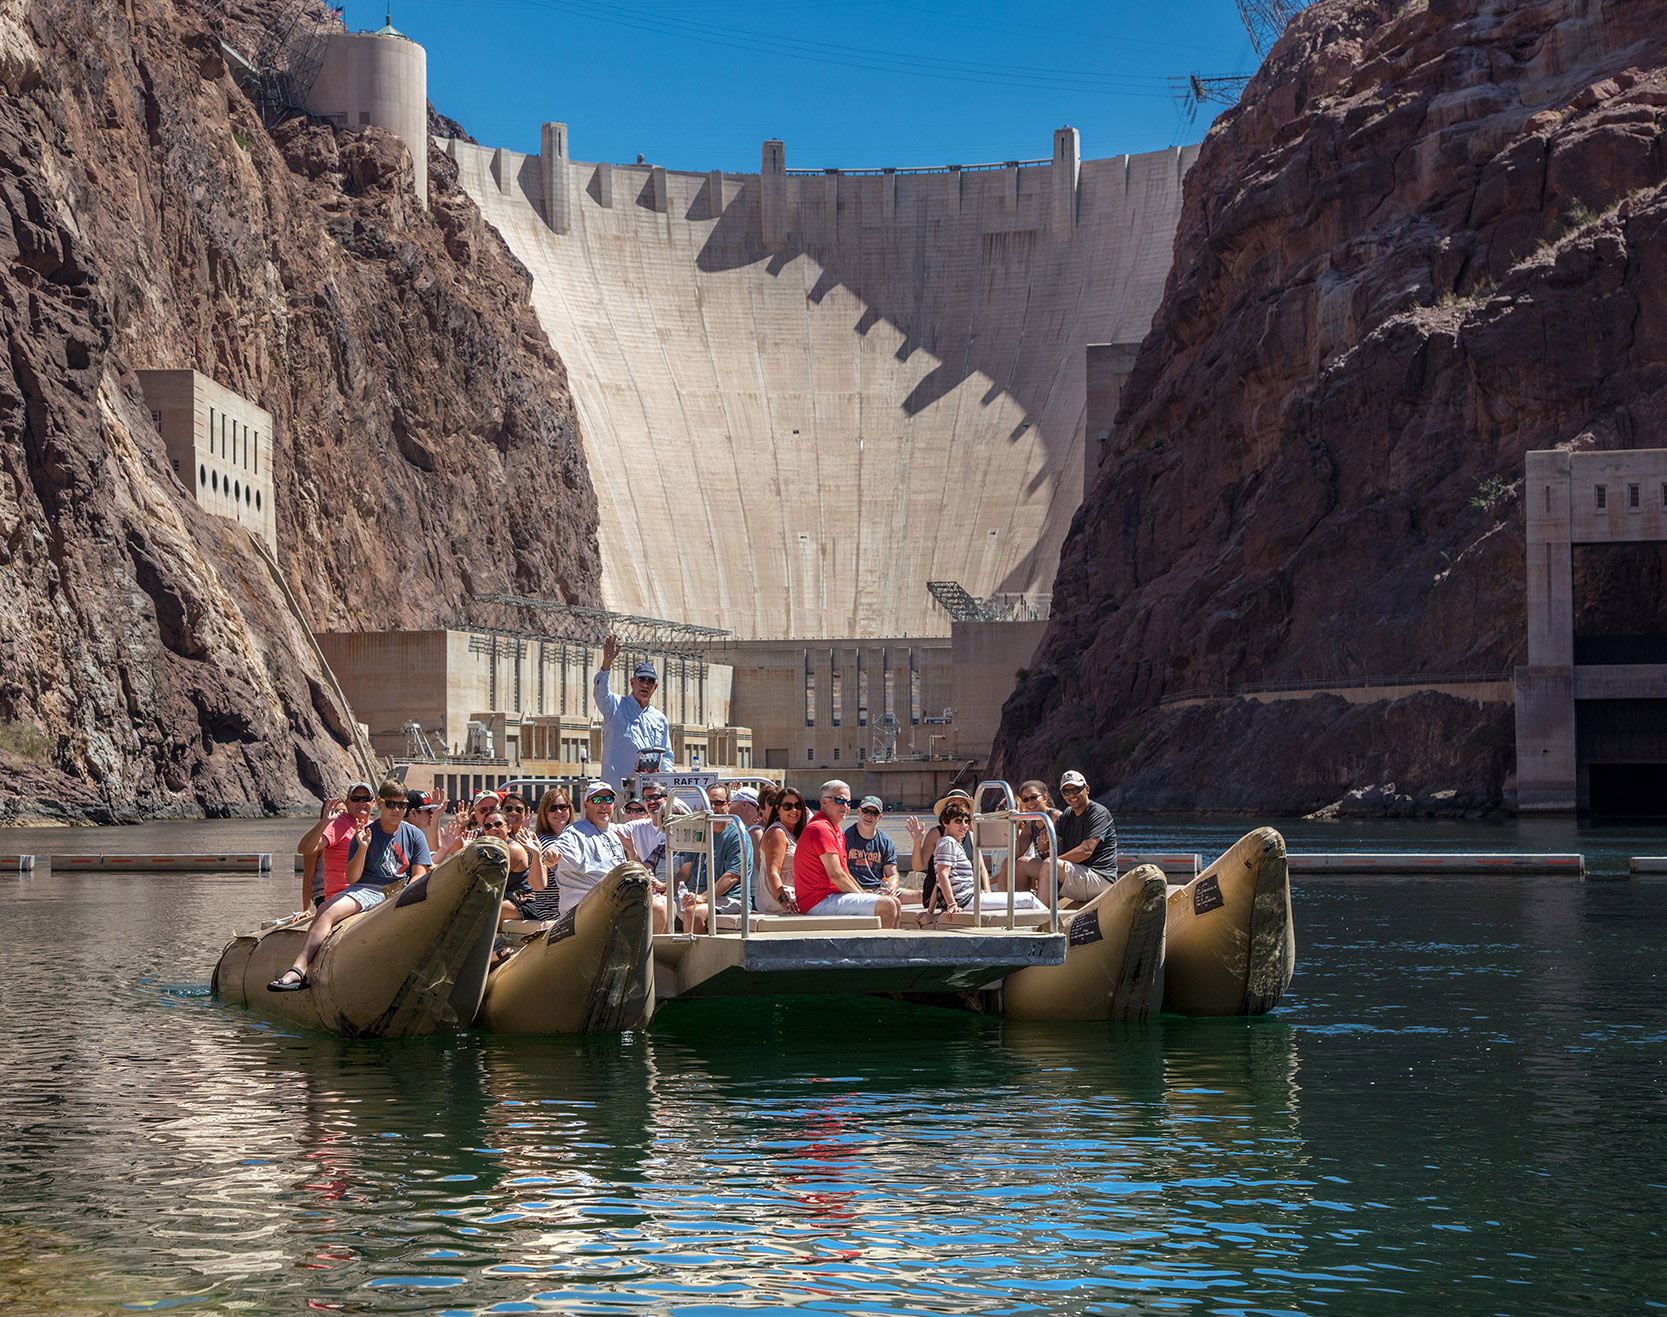 Pontoon Boat in Black Canyon near Hoover dam